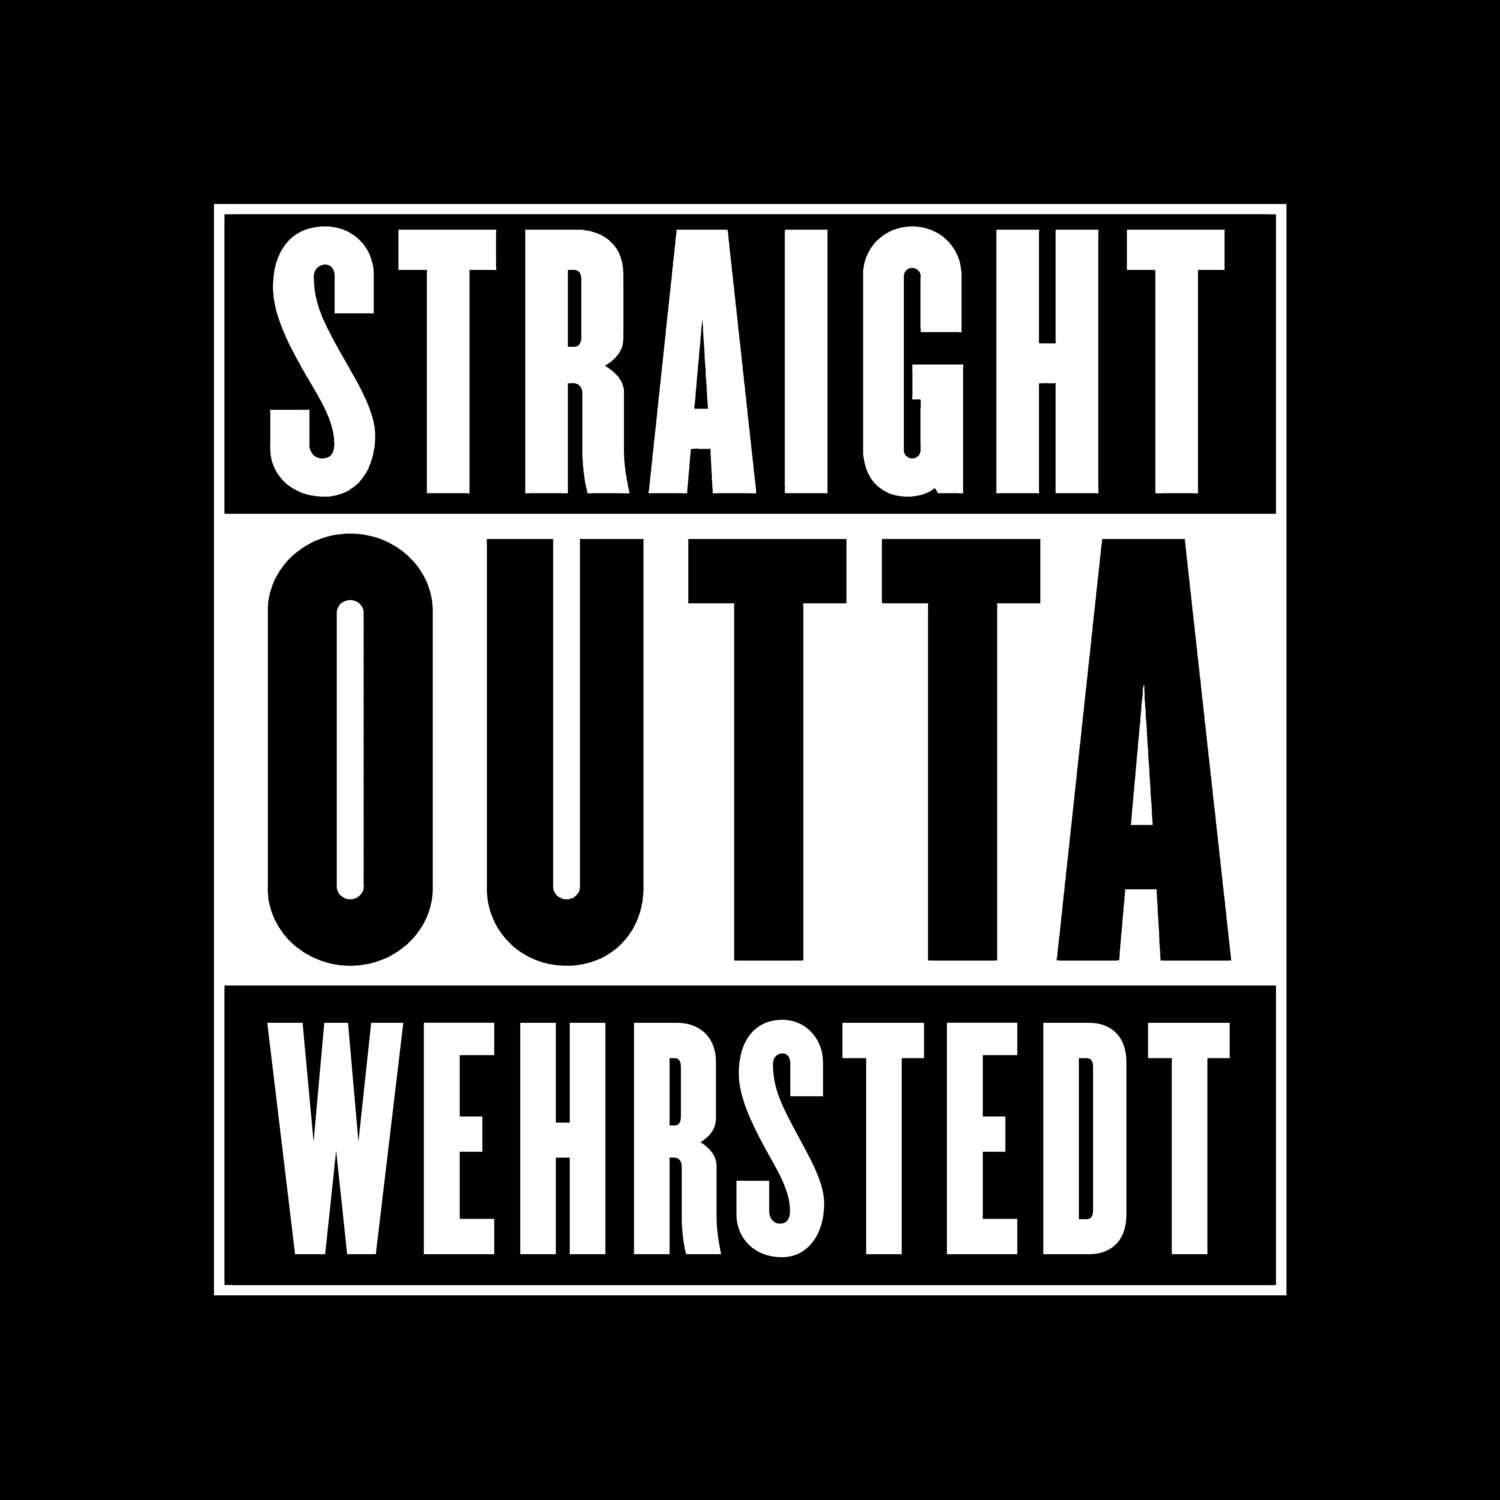 Wehrstedt T-Shirt »Straight Outta«